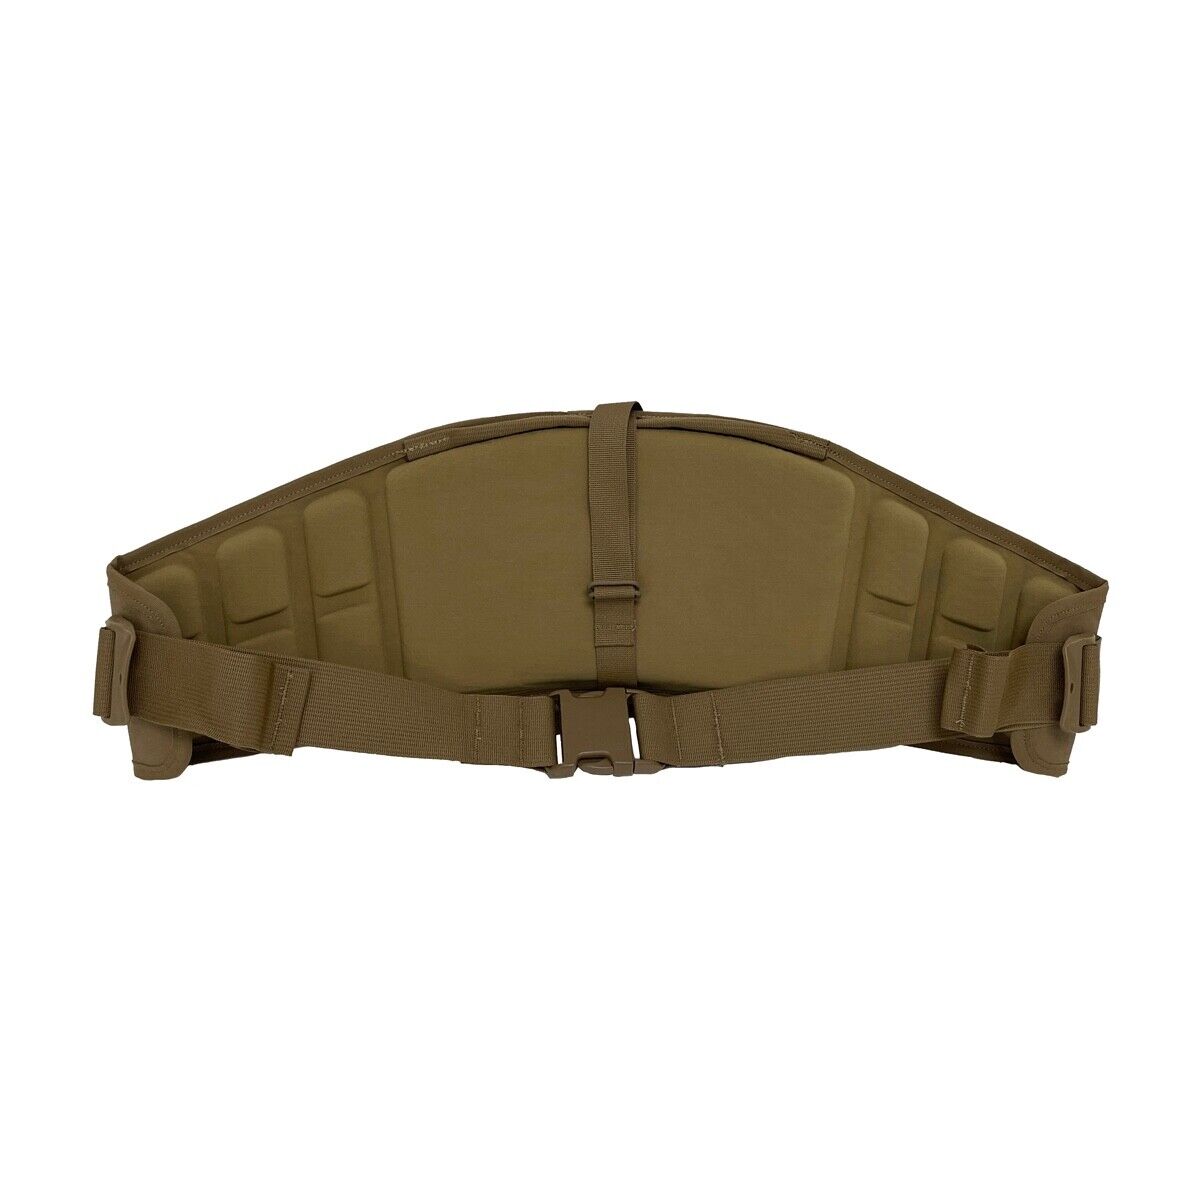 USMC FILBE Hip Belt - Tactical Military Backpack Accessory for Comfortable Load